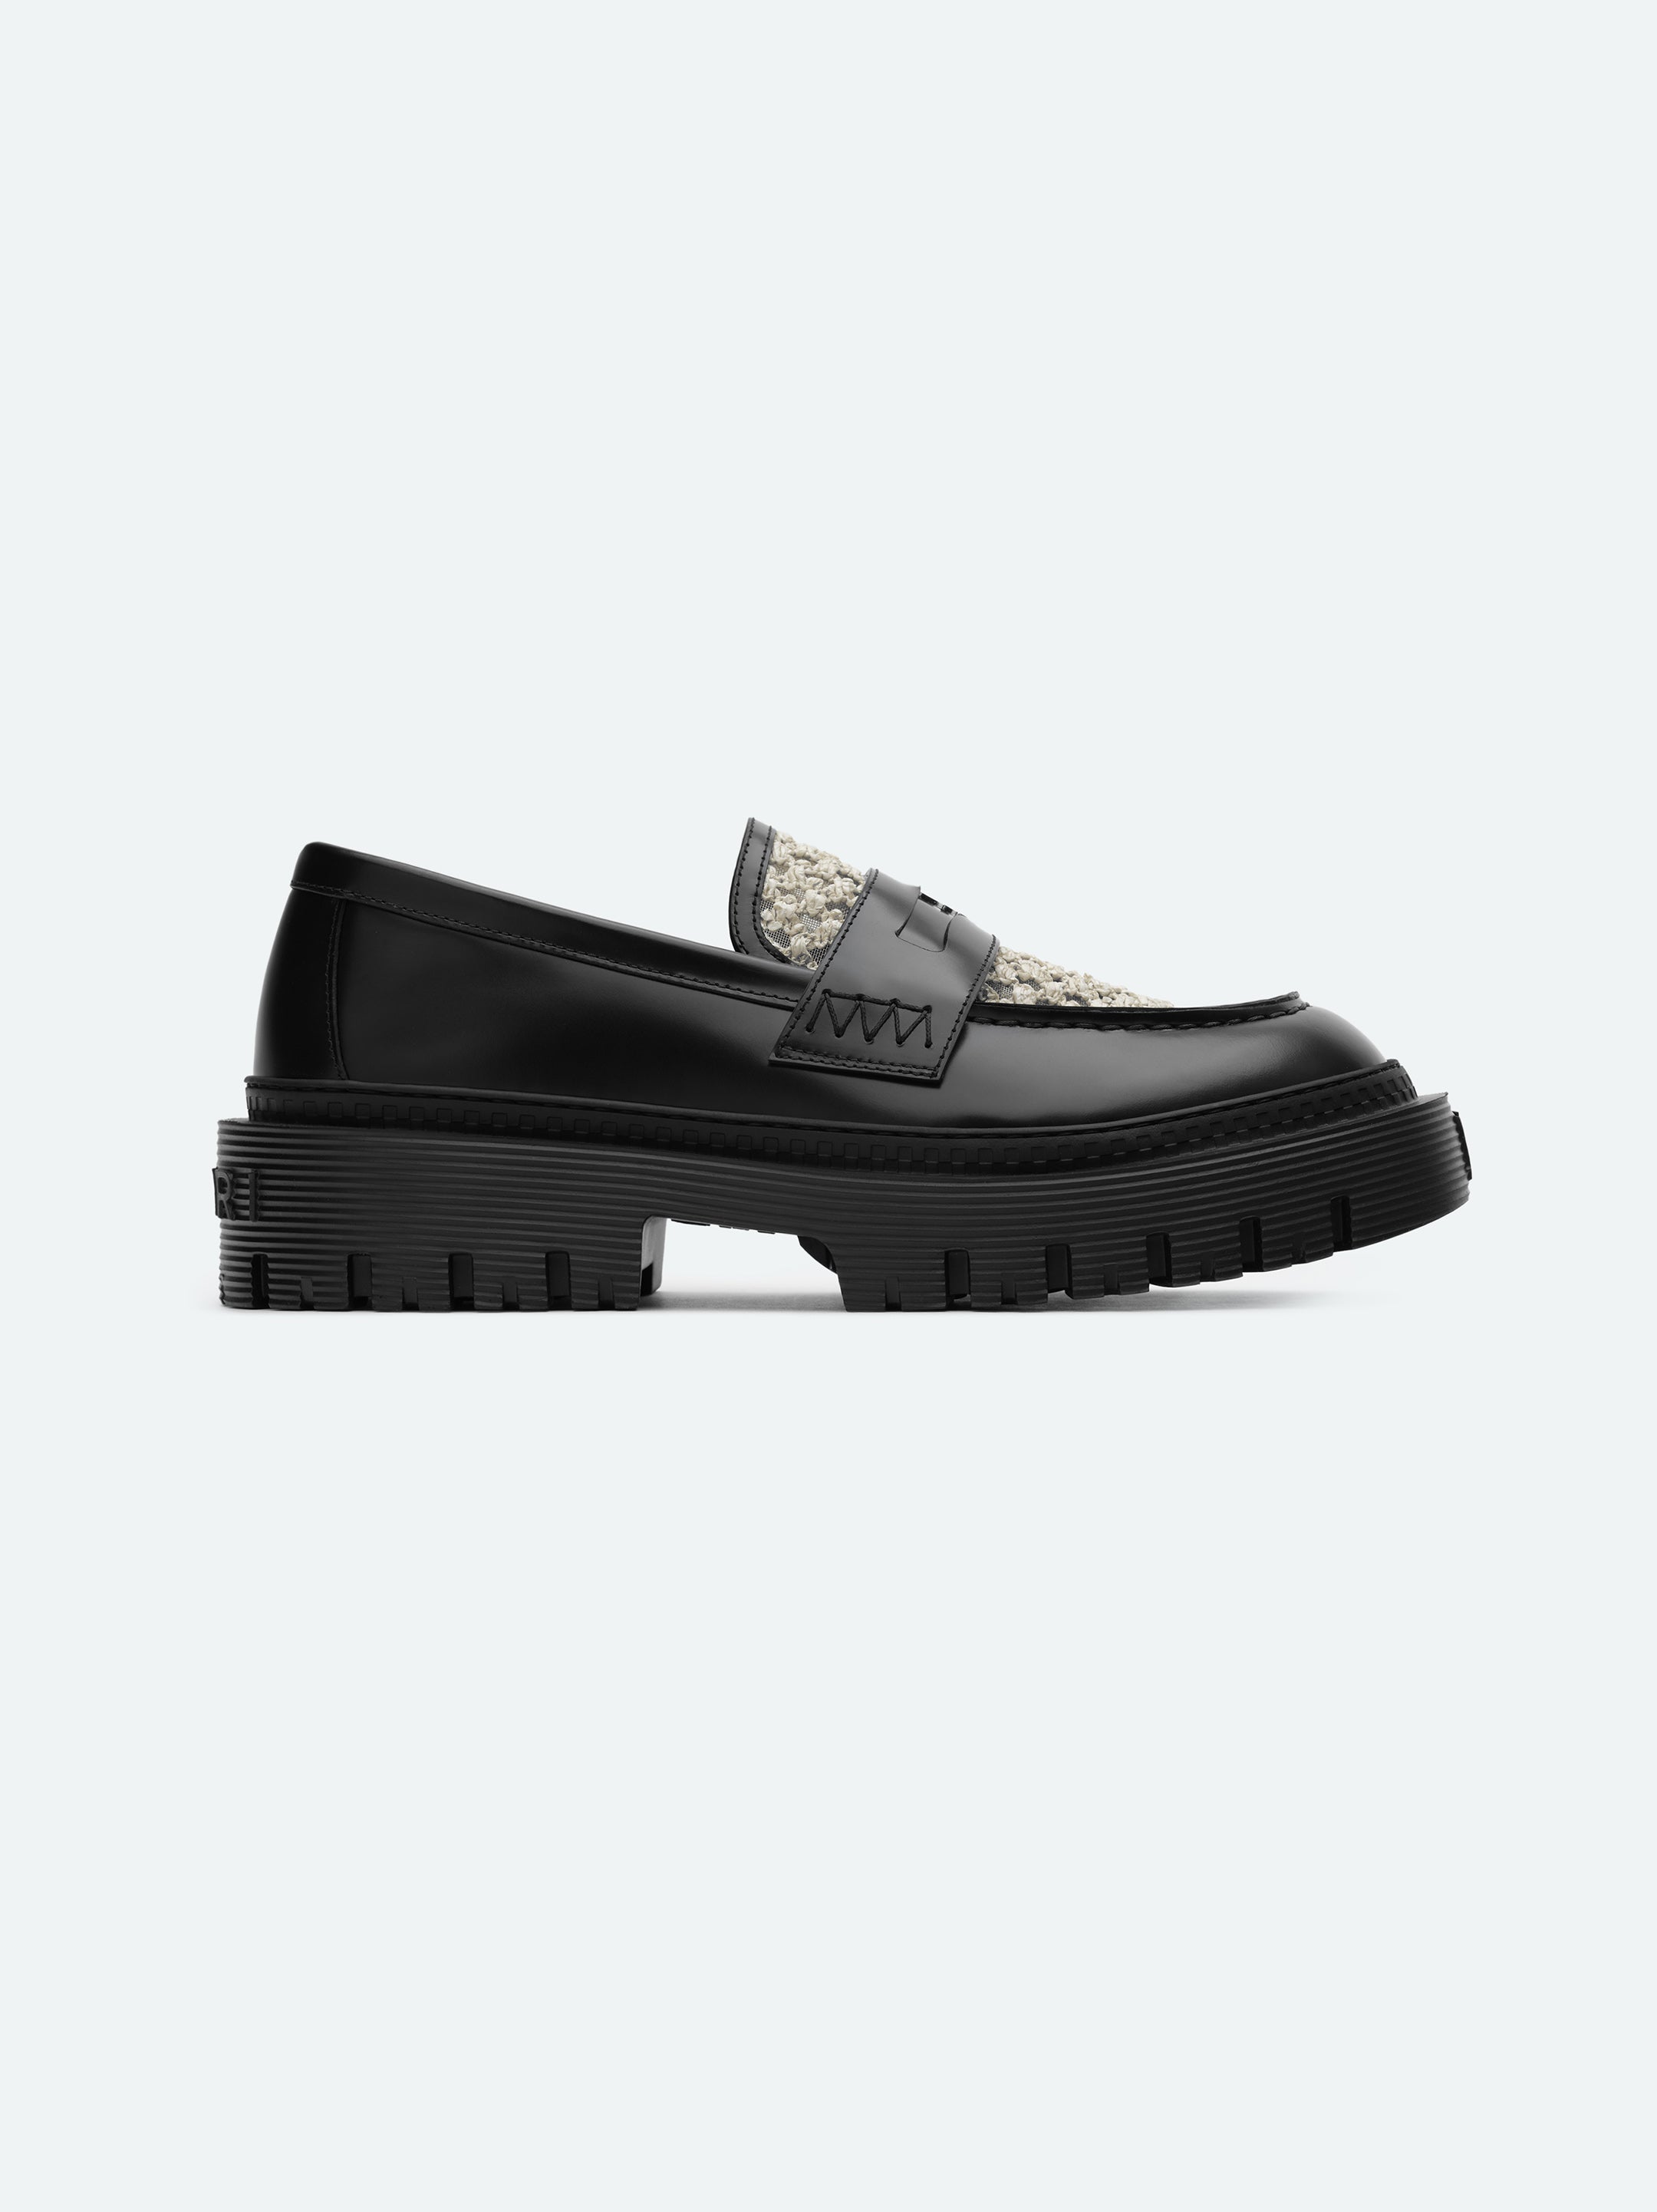 Product JUMBO LOAFER - Black featured image